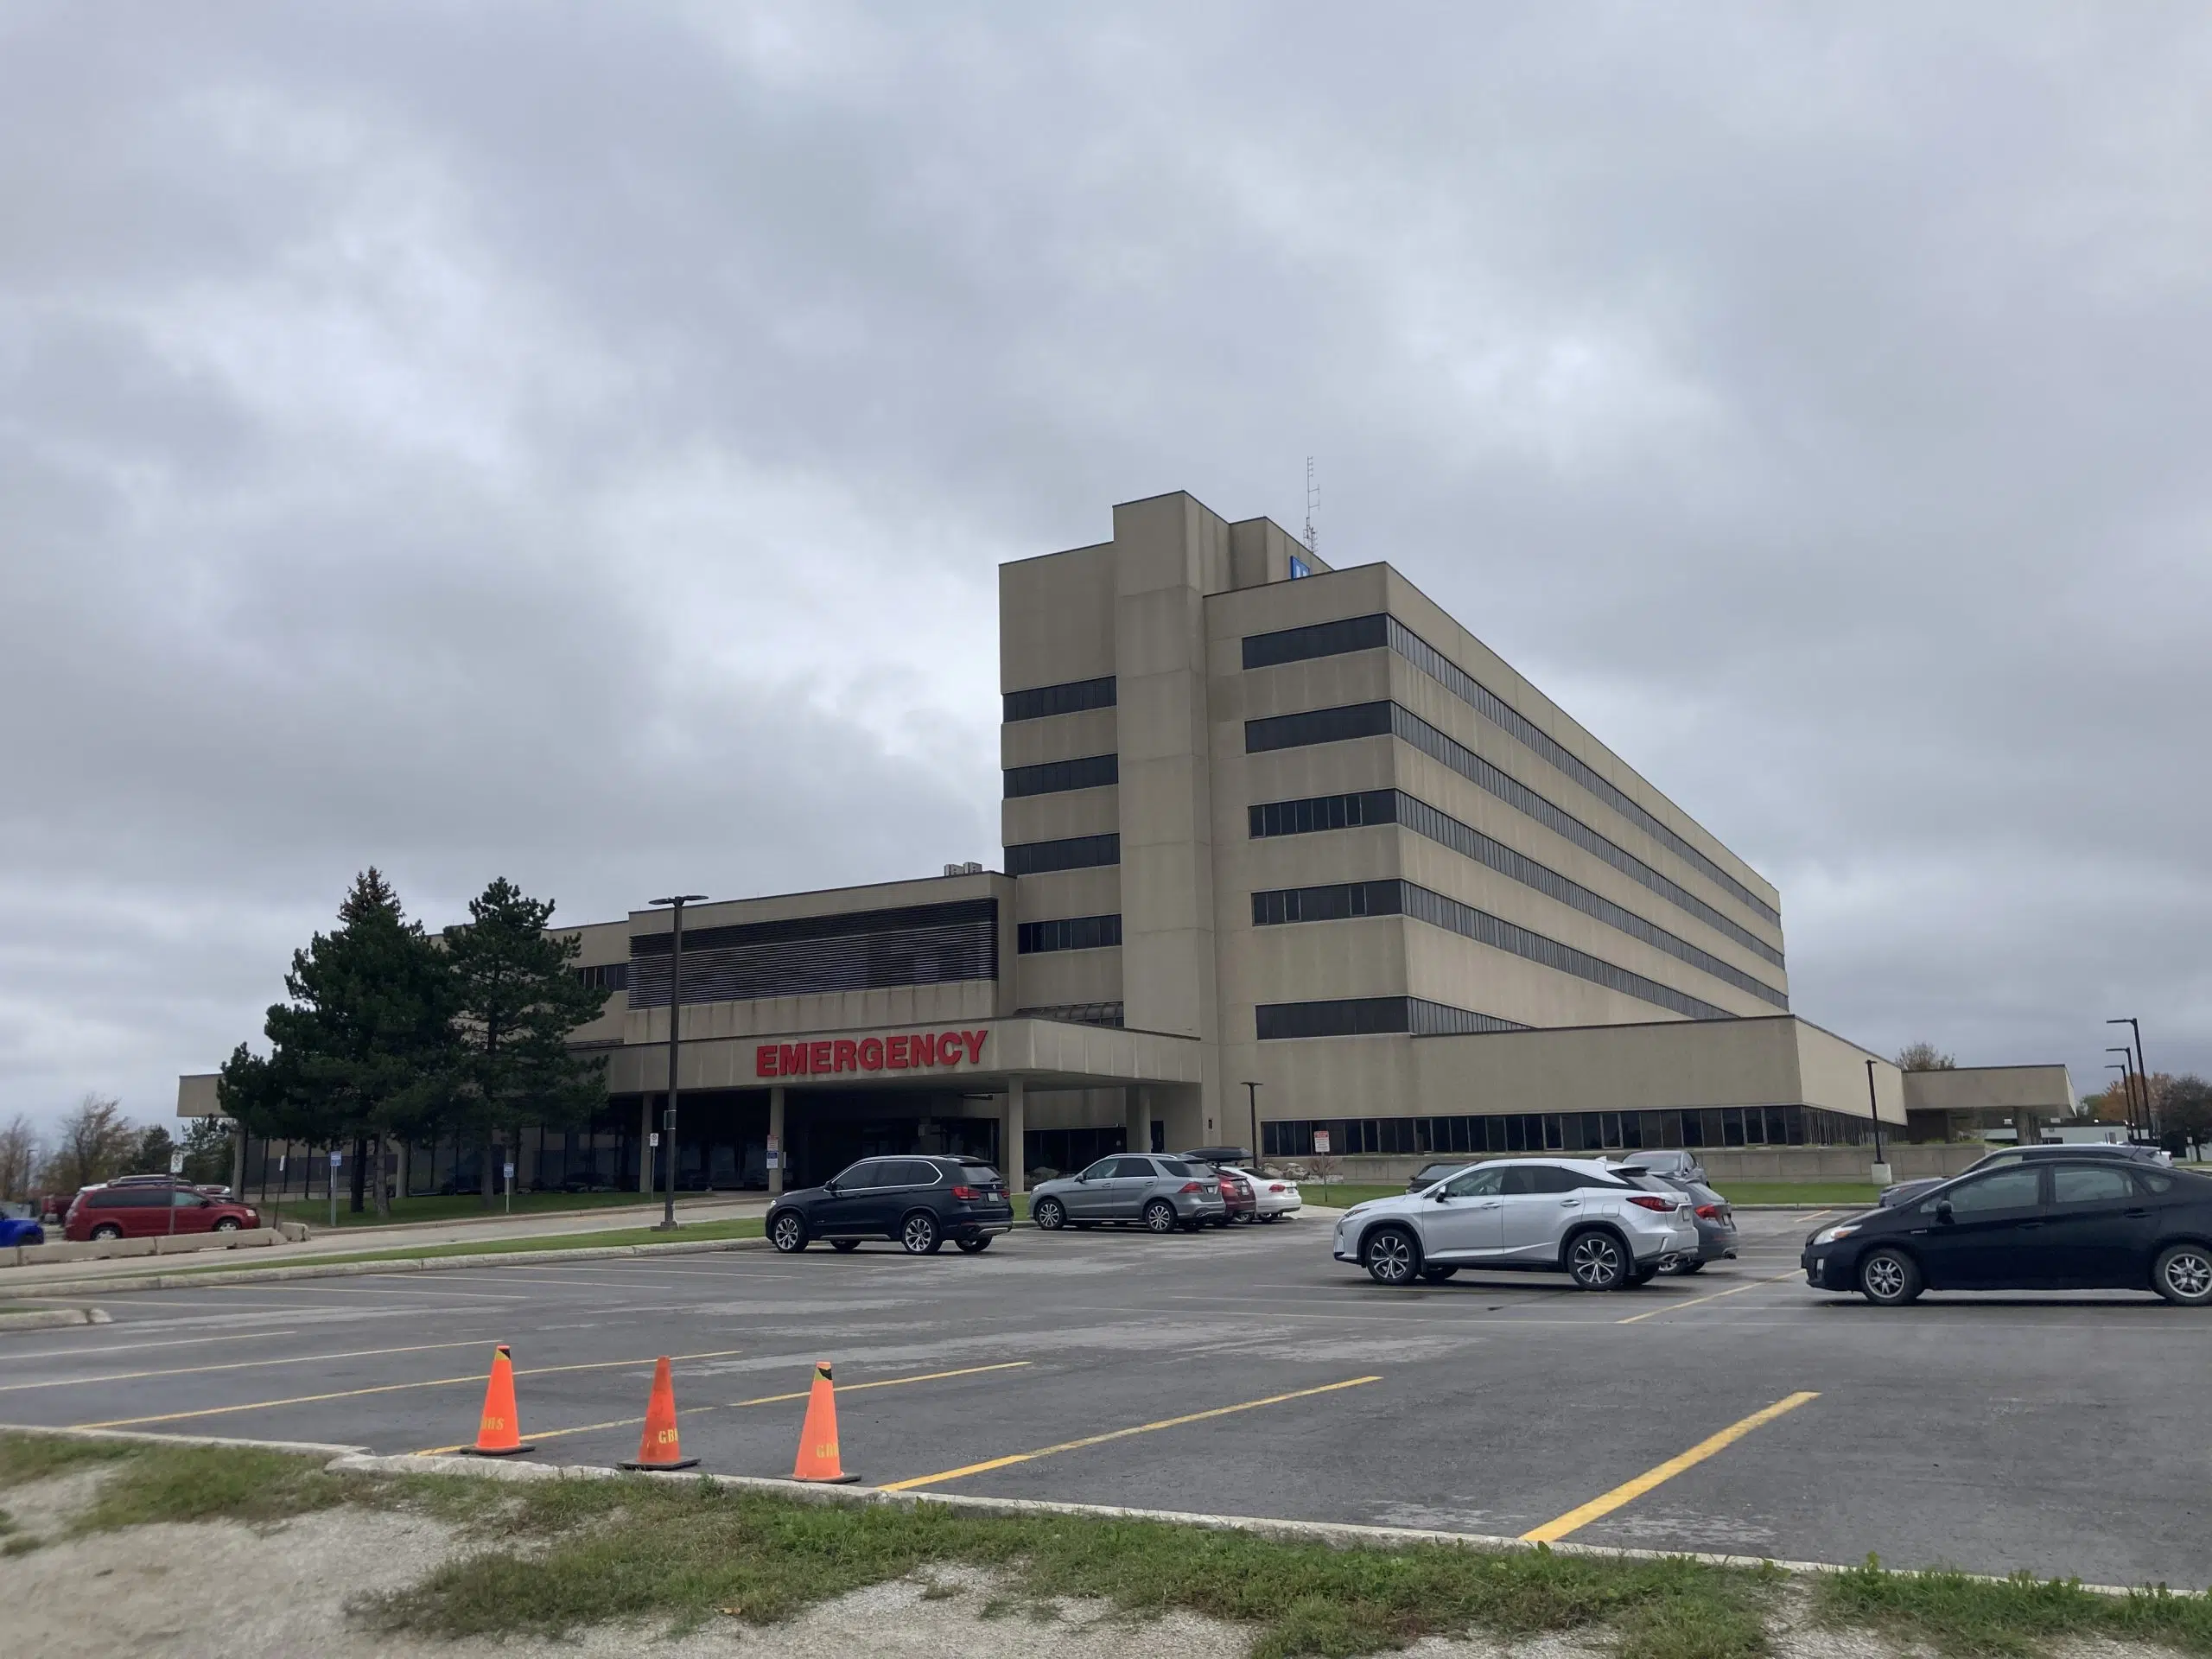 Parking Fees To Increase At Some Grey Bruce Hospitals